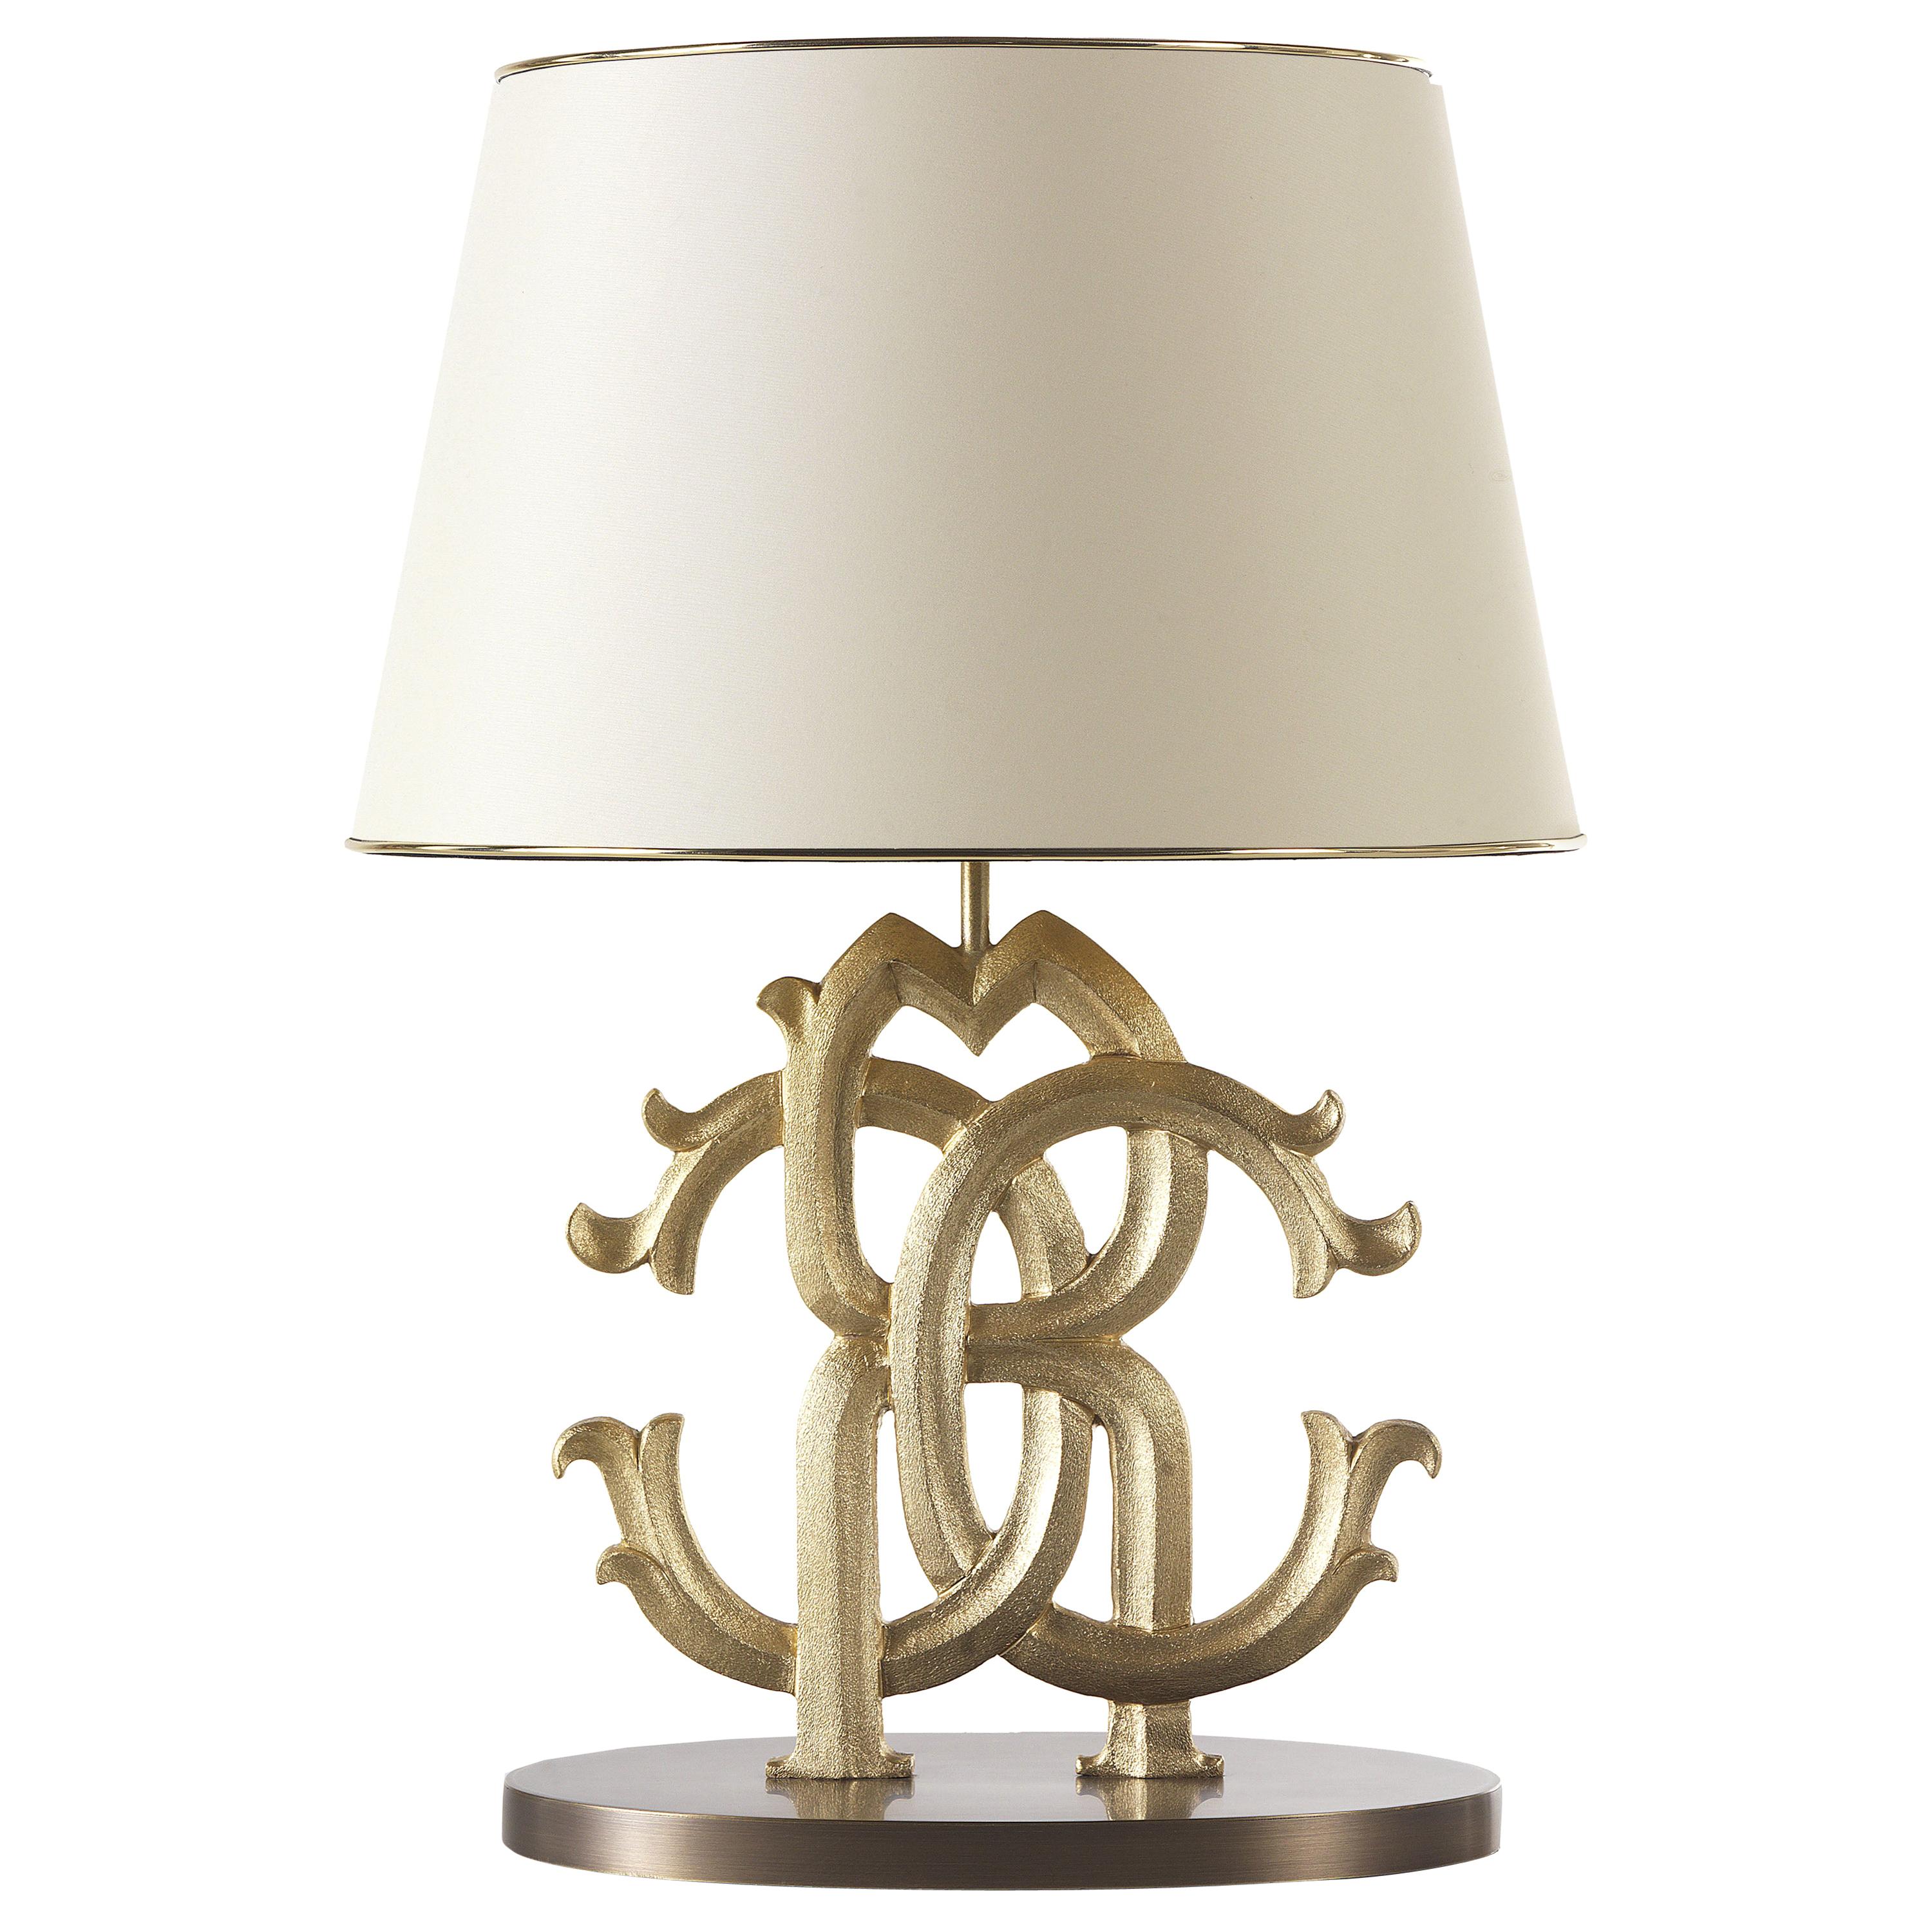 21st Century Logo Table Lamp with Ivory Shade by Roberto Cavalli Home Interiors